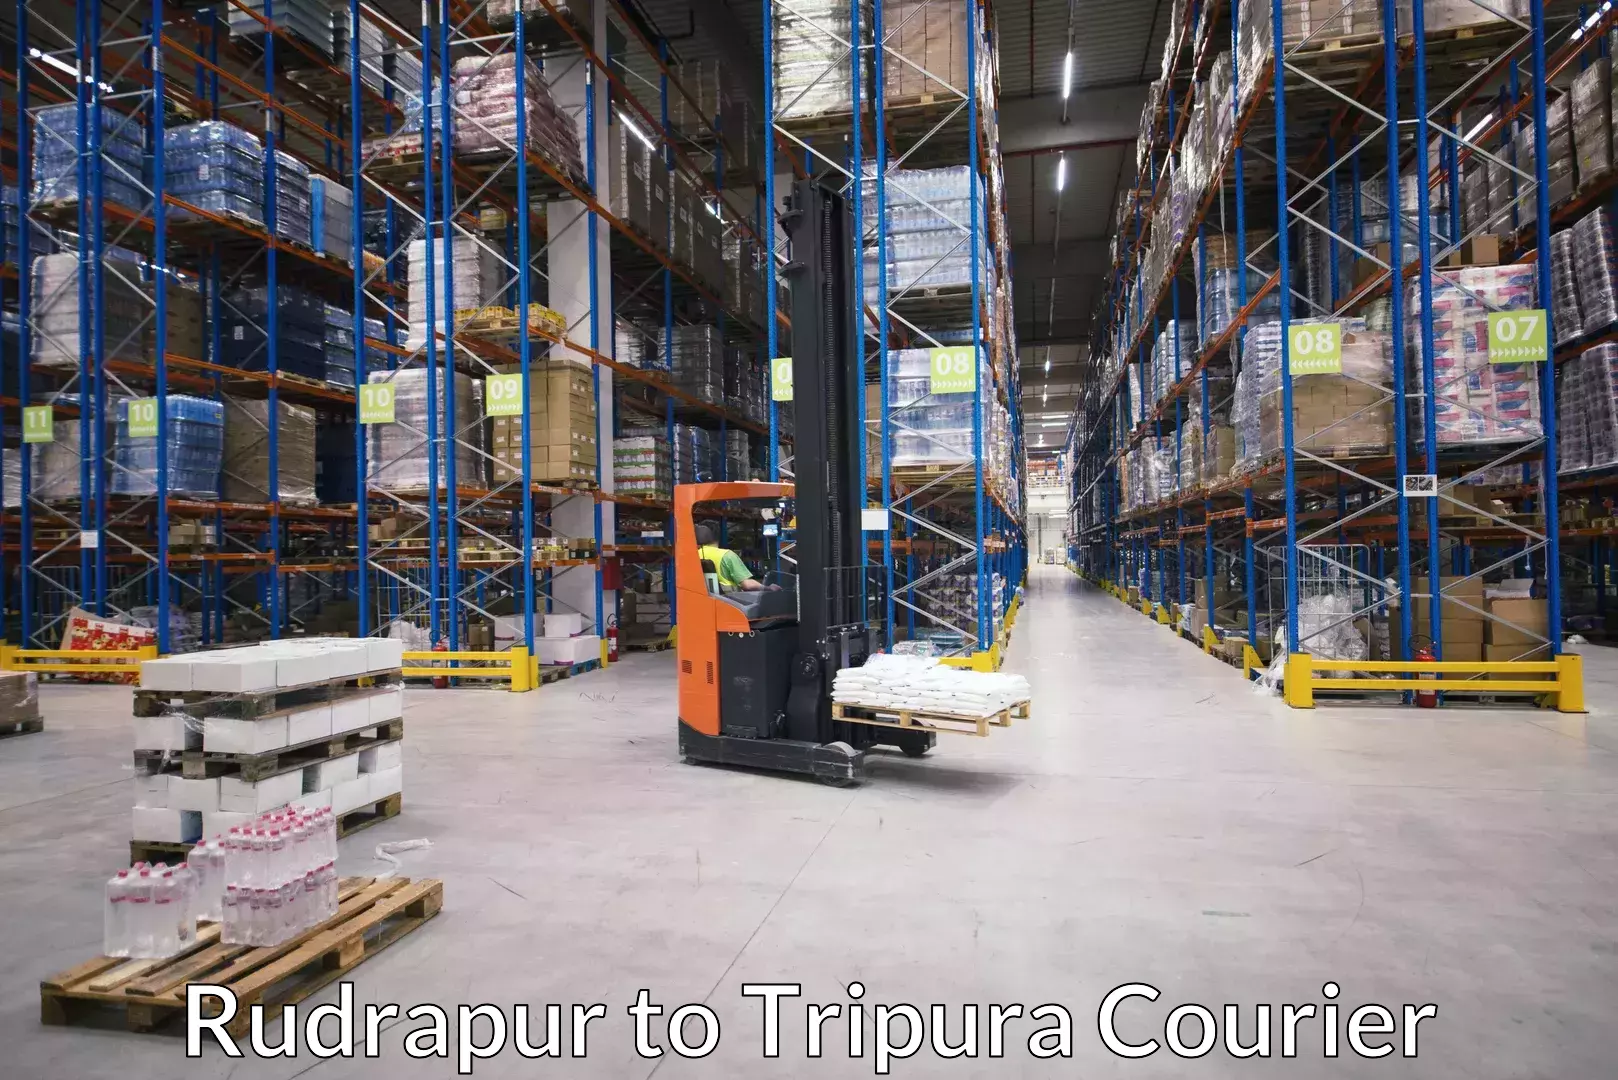 Luggage delivery optimization Rudrapur to Udaipur Tripura